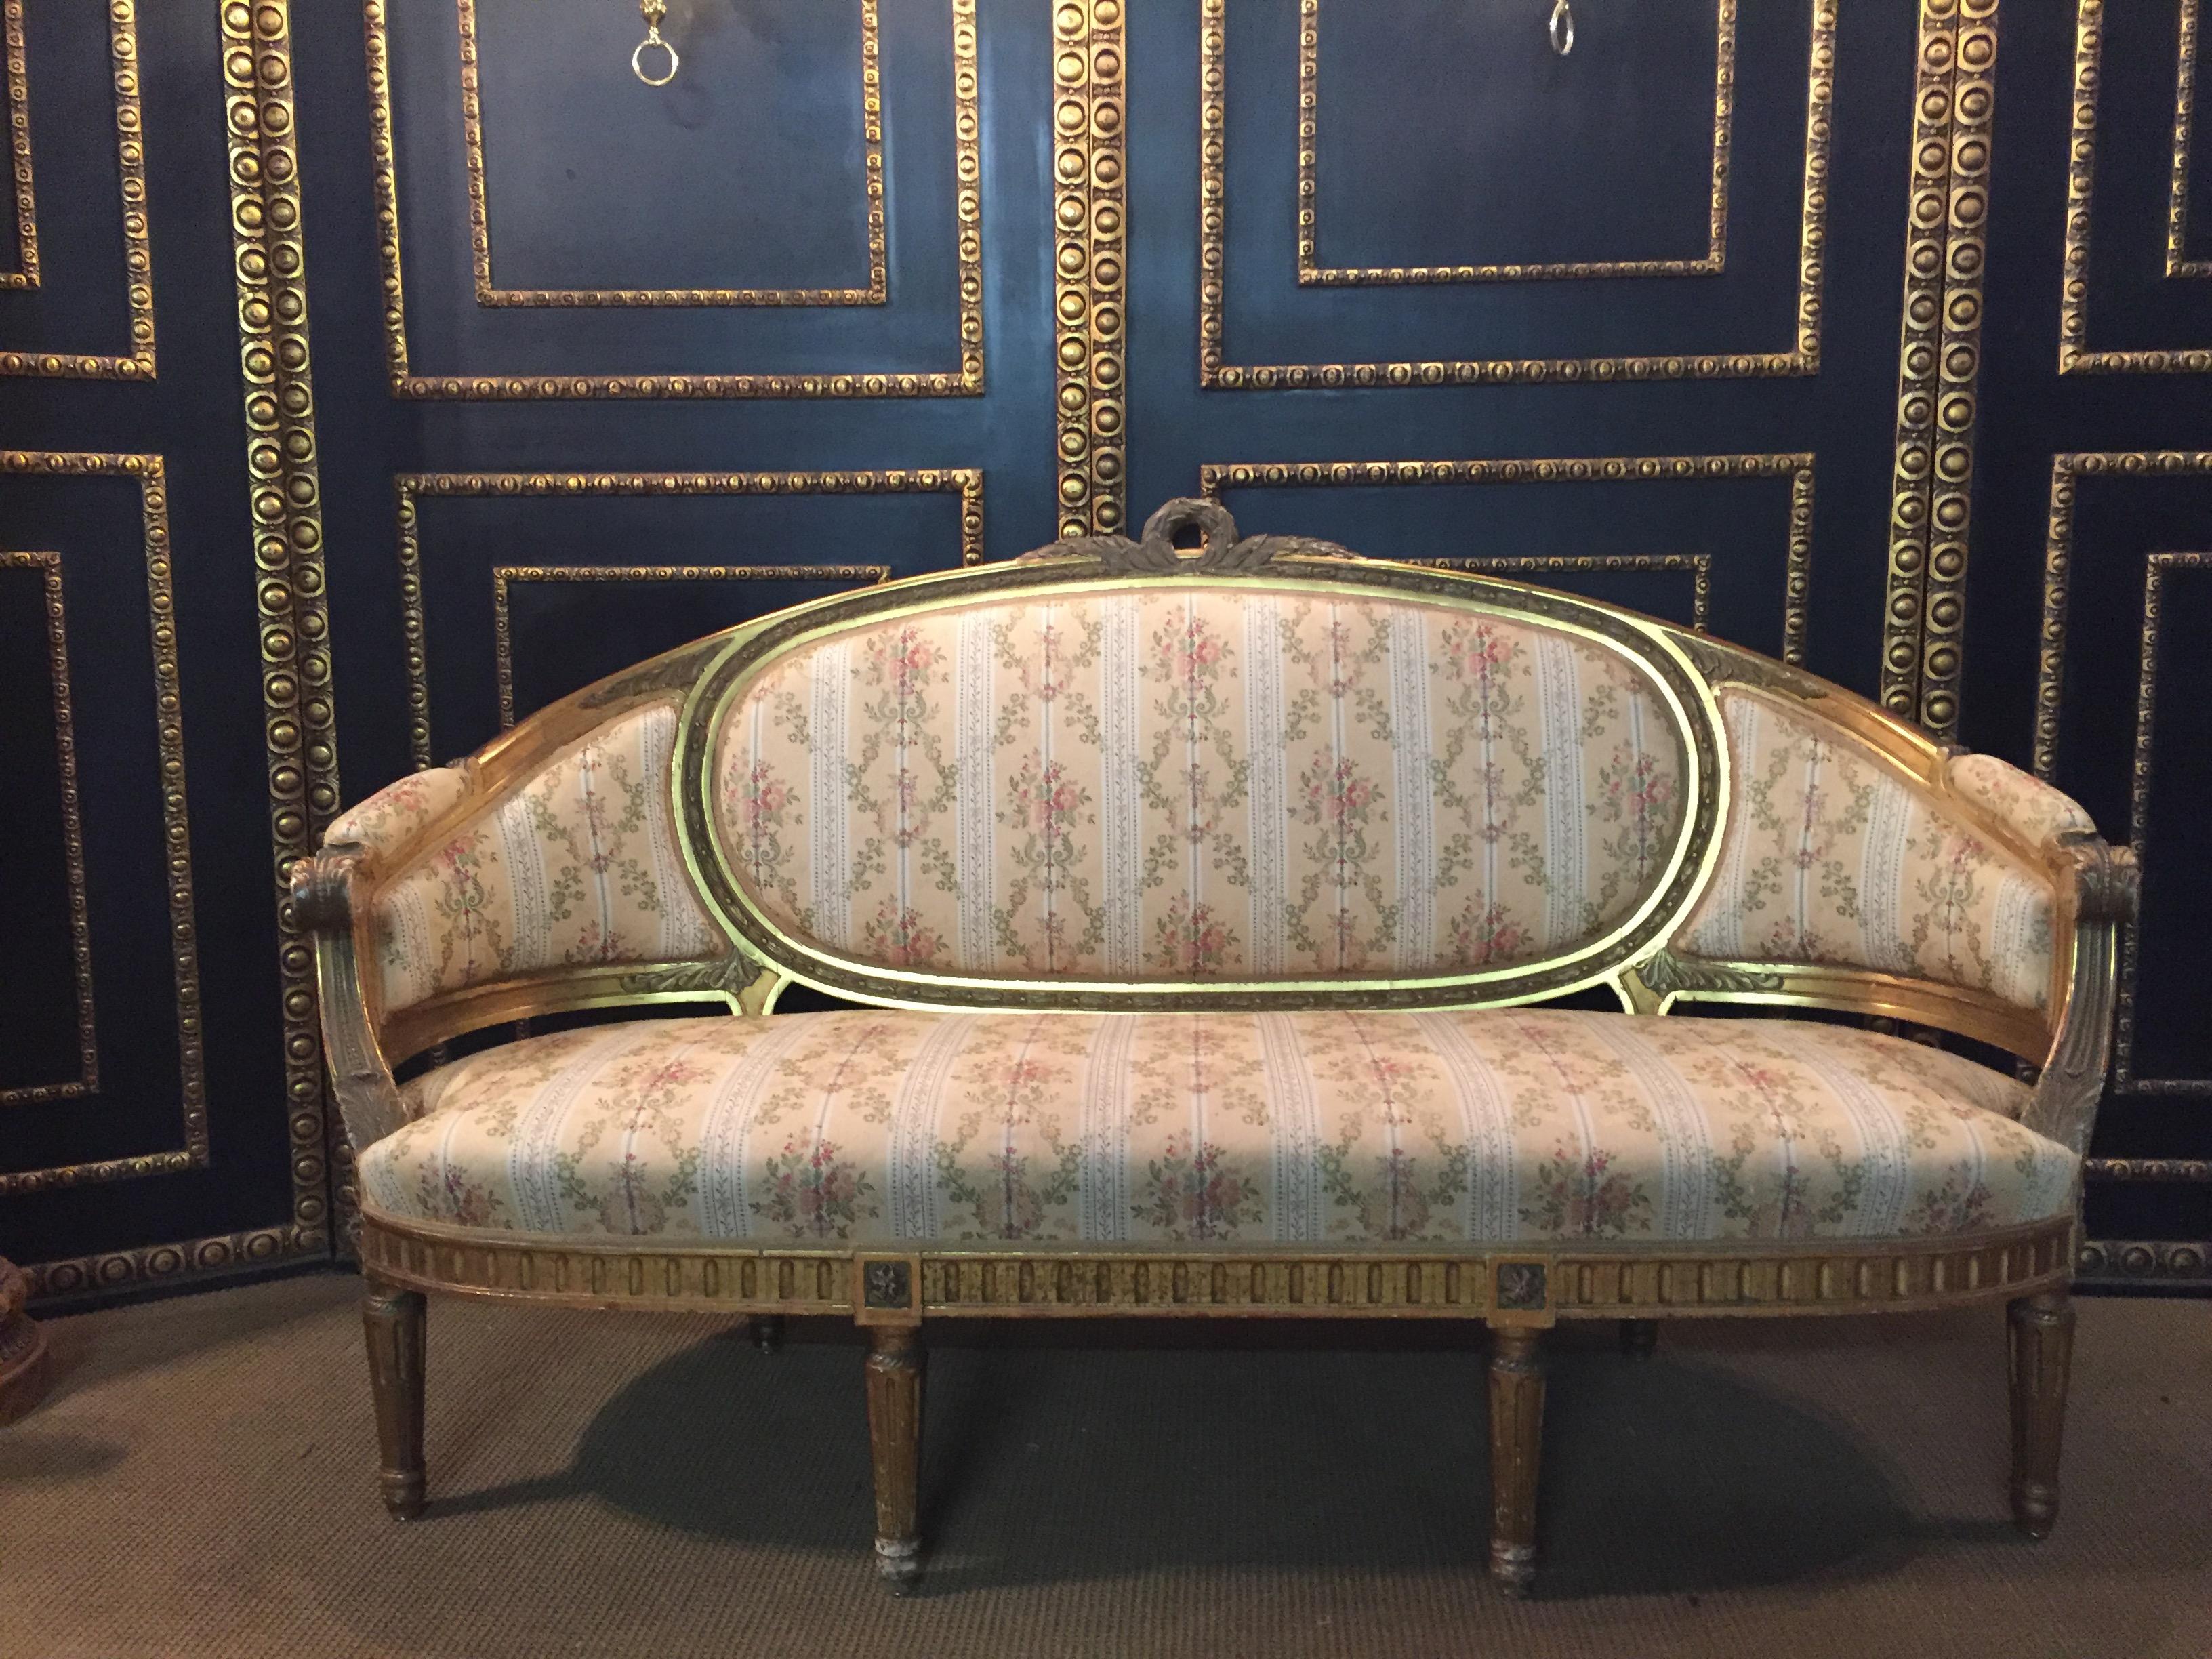 Solid beechwood, finely carved, poliment gilded and partial sheet gilded. Cambered and carved frame on carved, tapering legs. Curved armrests. Flanked by relieved leaf rosettes. Rising armrests in medallion-shaped back frame with carved crown